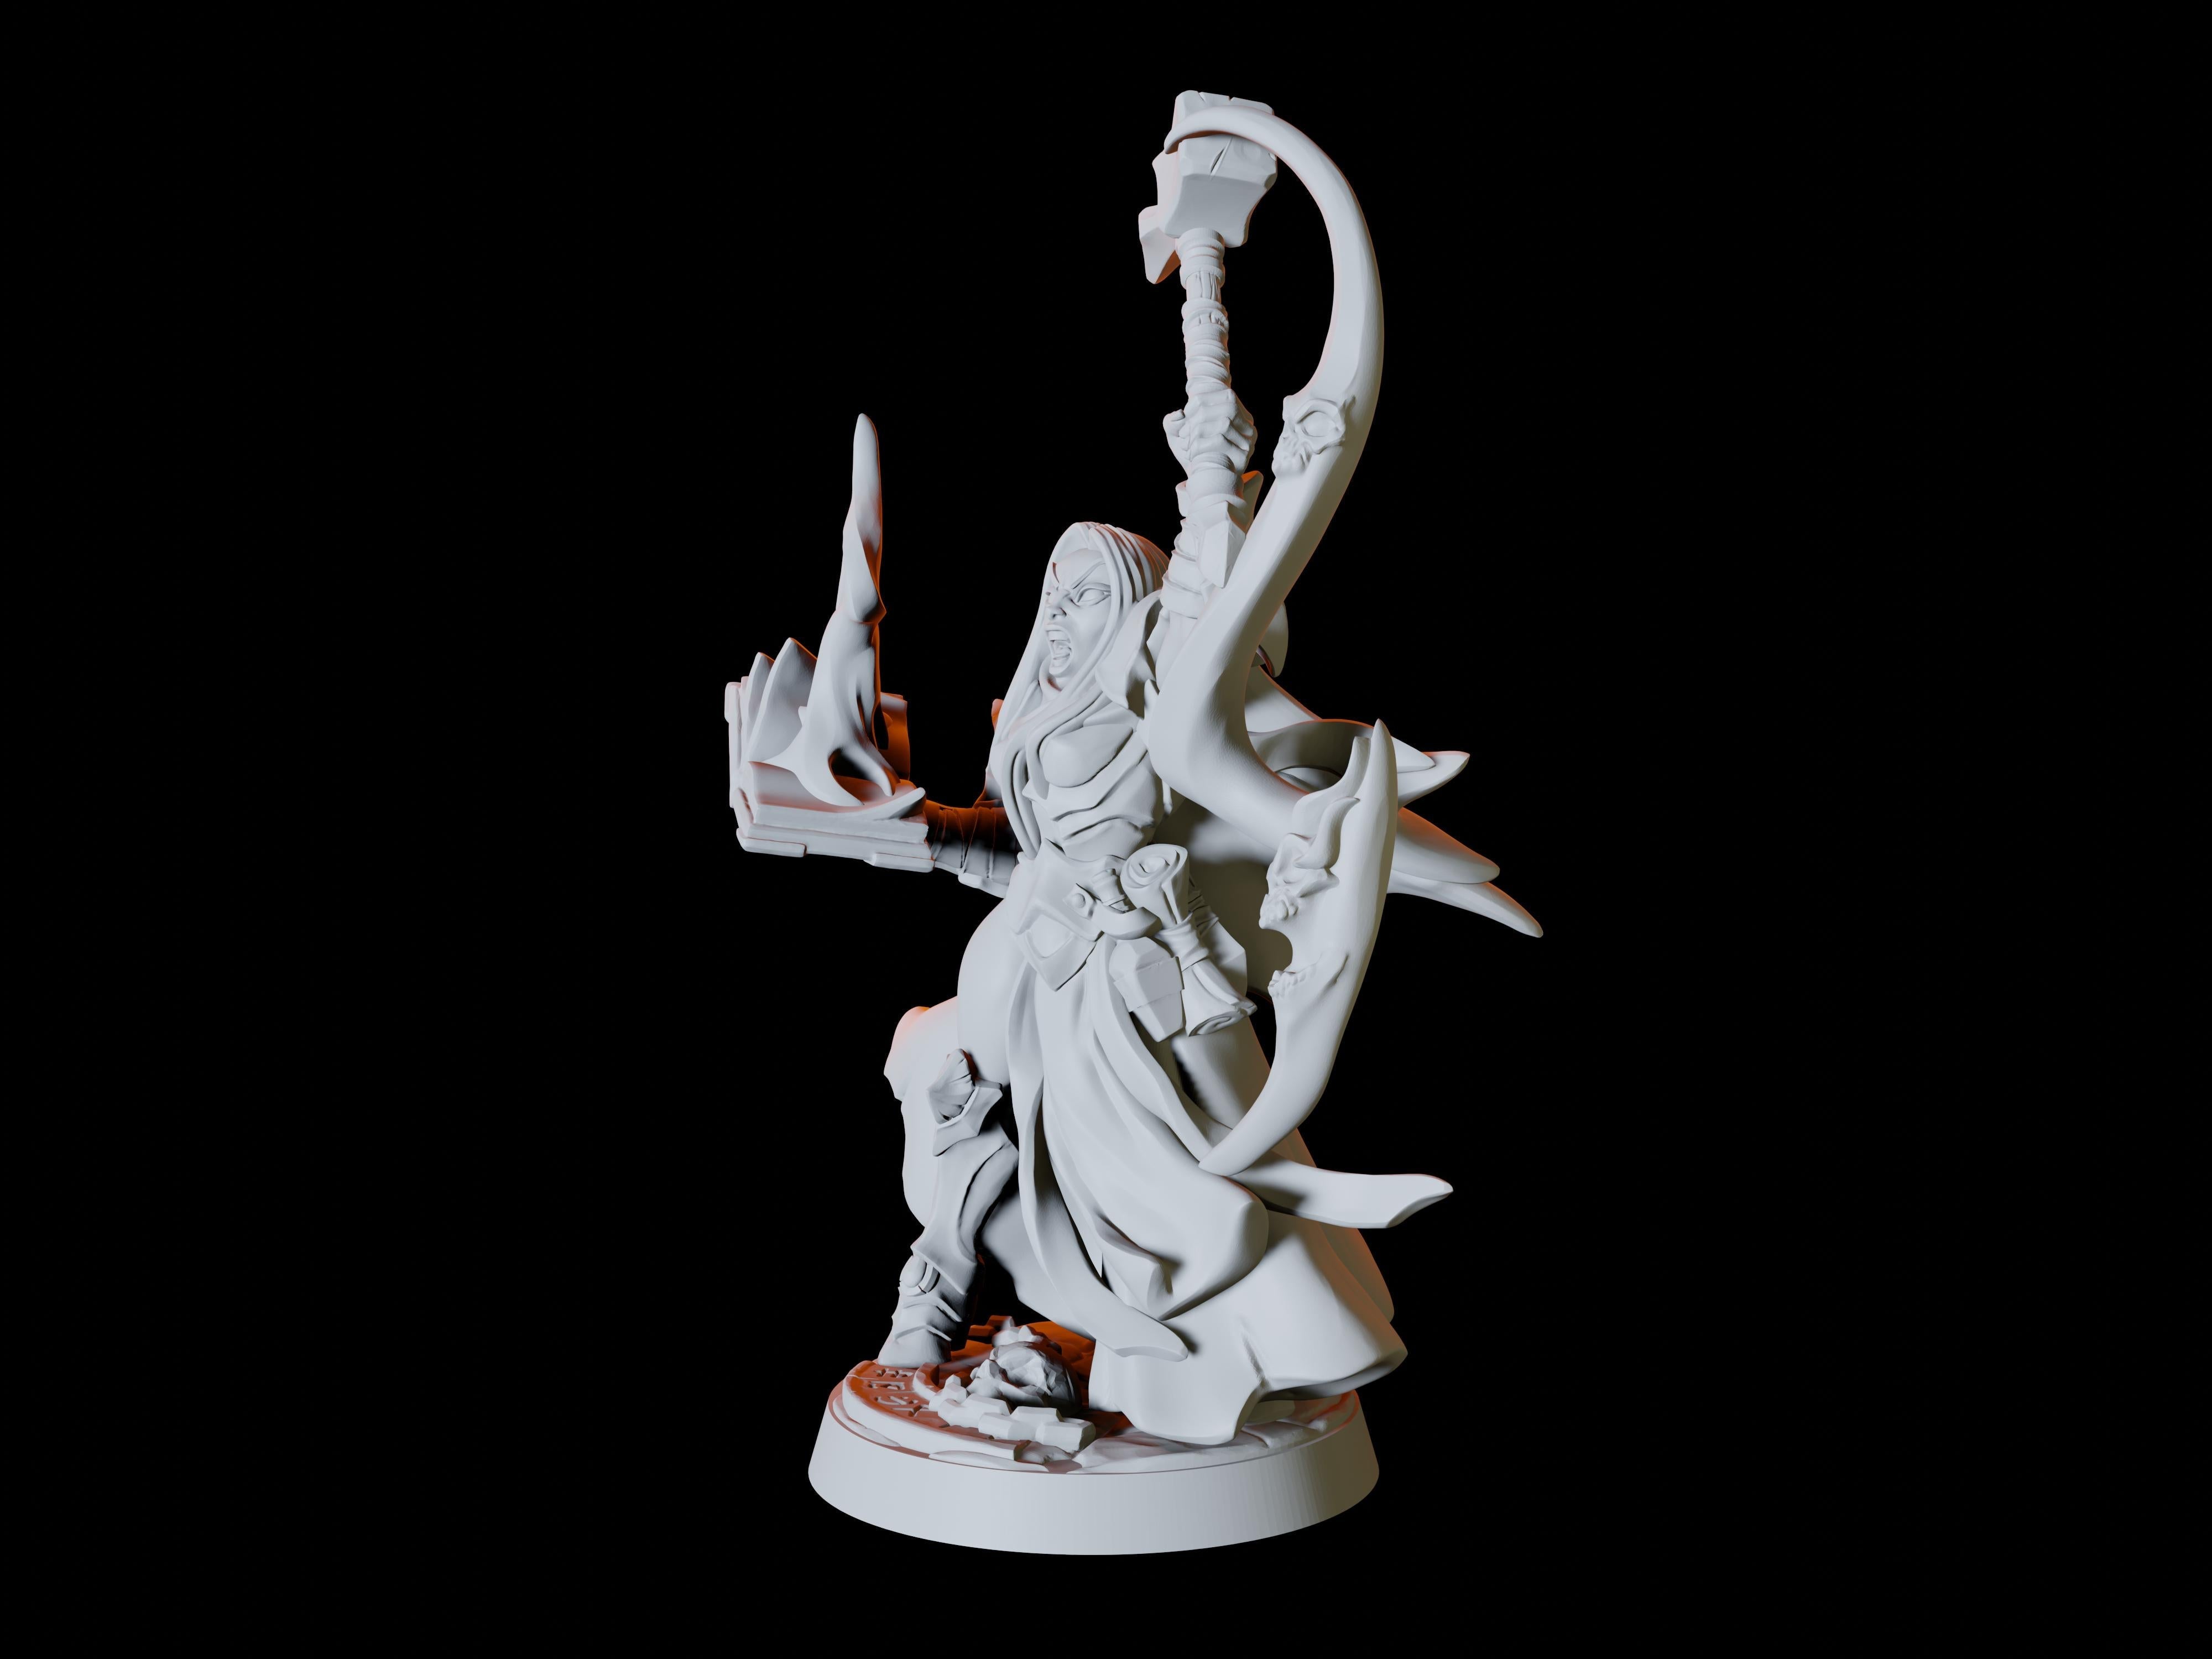 Drow or Dark Elf Miniature for Dungeons and Dragons - Myth Forged